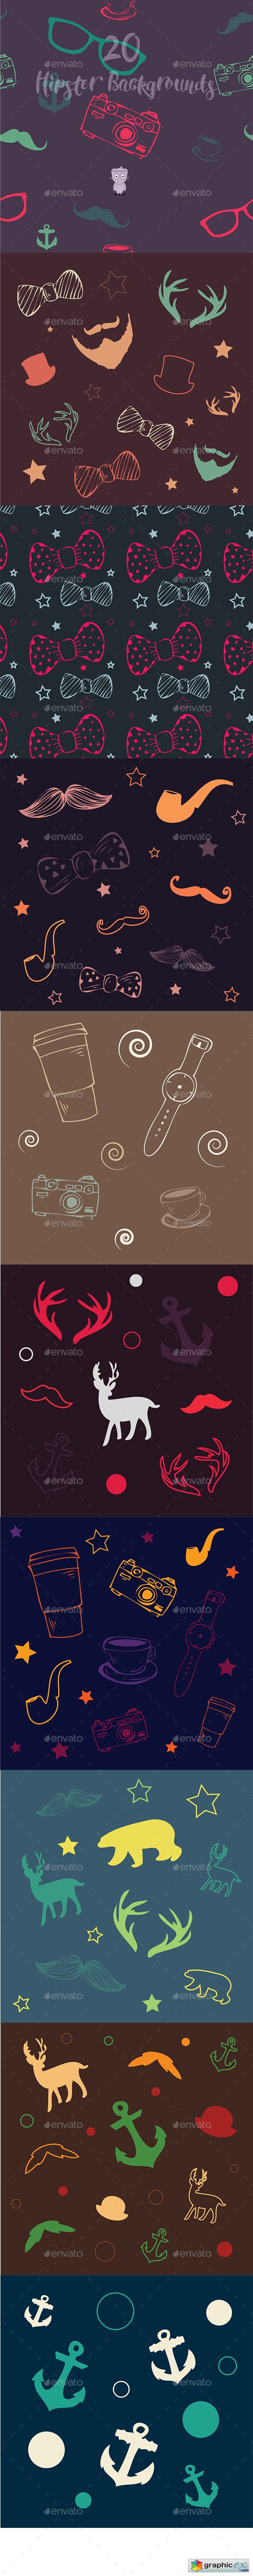 20 Hipster Backgrounds